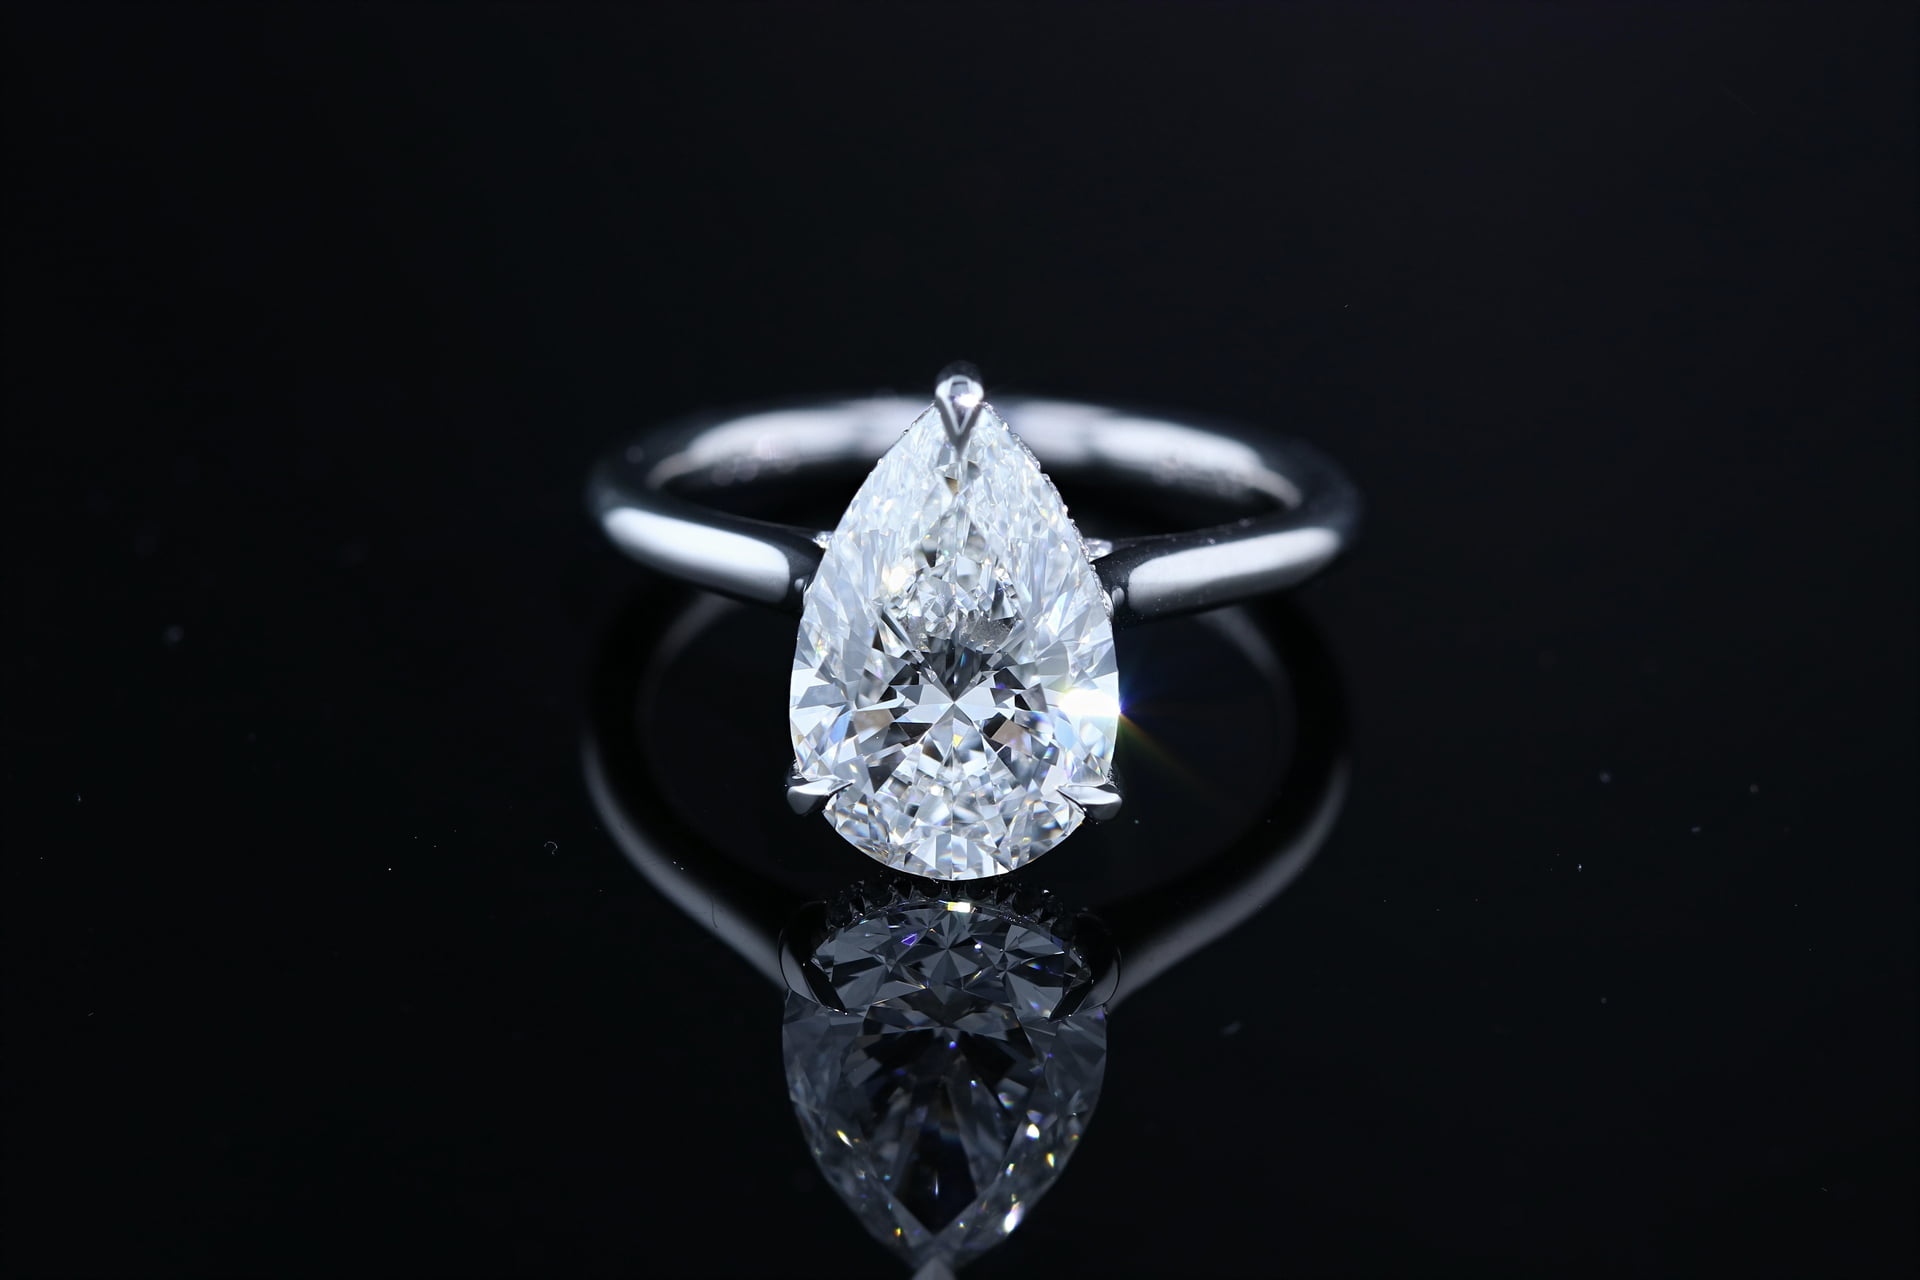 NATURAL DIAMOND - CUSHION-CUT THREE STONE ENGAGEMENT RING - INNER  EXPRESSIONS FINE JEWELRY DESIGN!